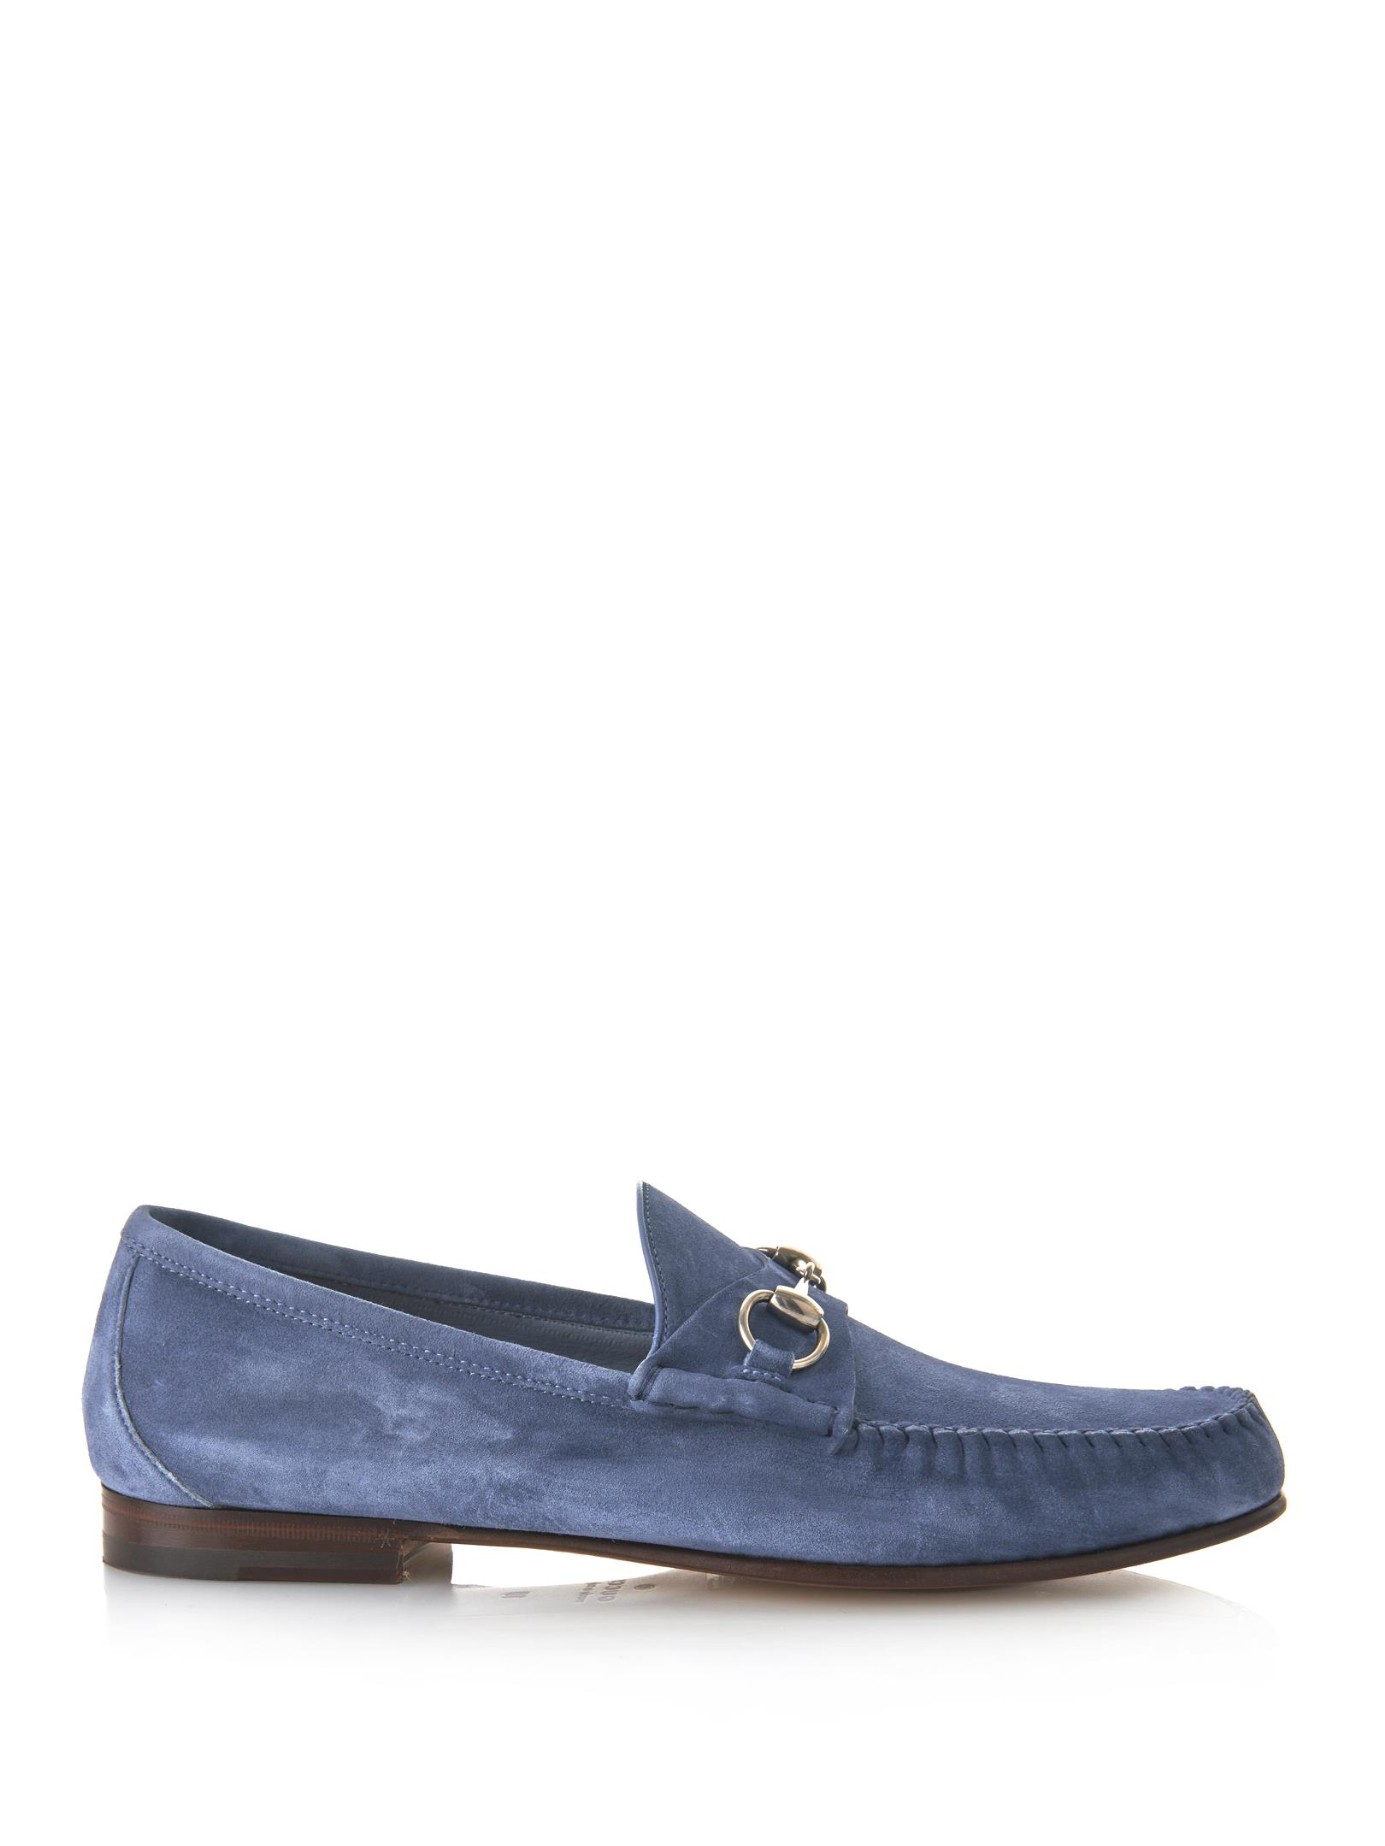 Gucci Roos Suede Loafers in Blue for Men